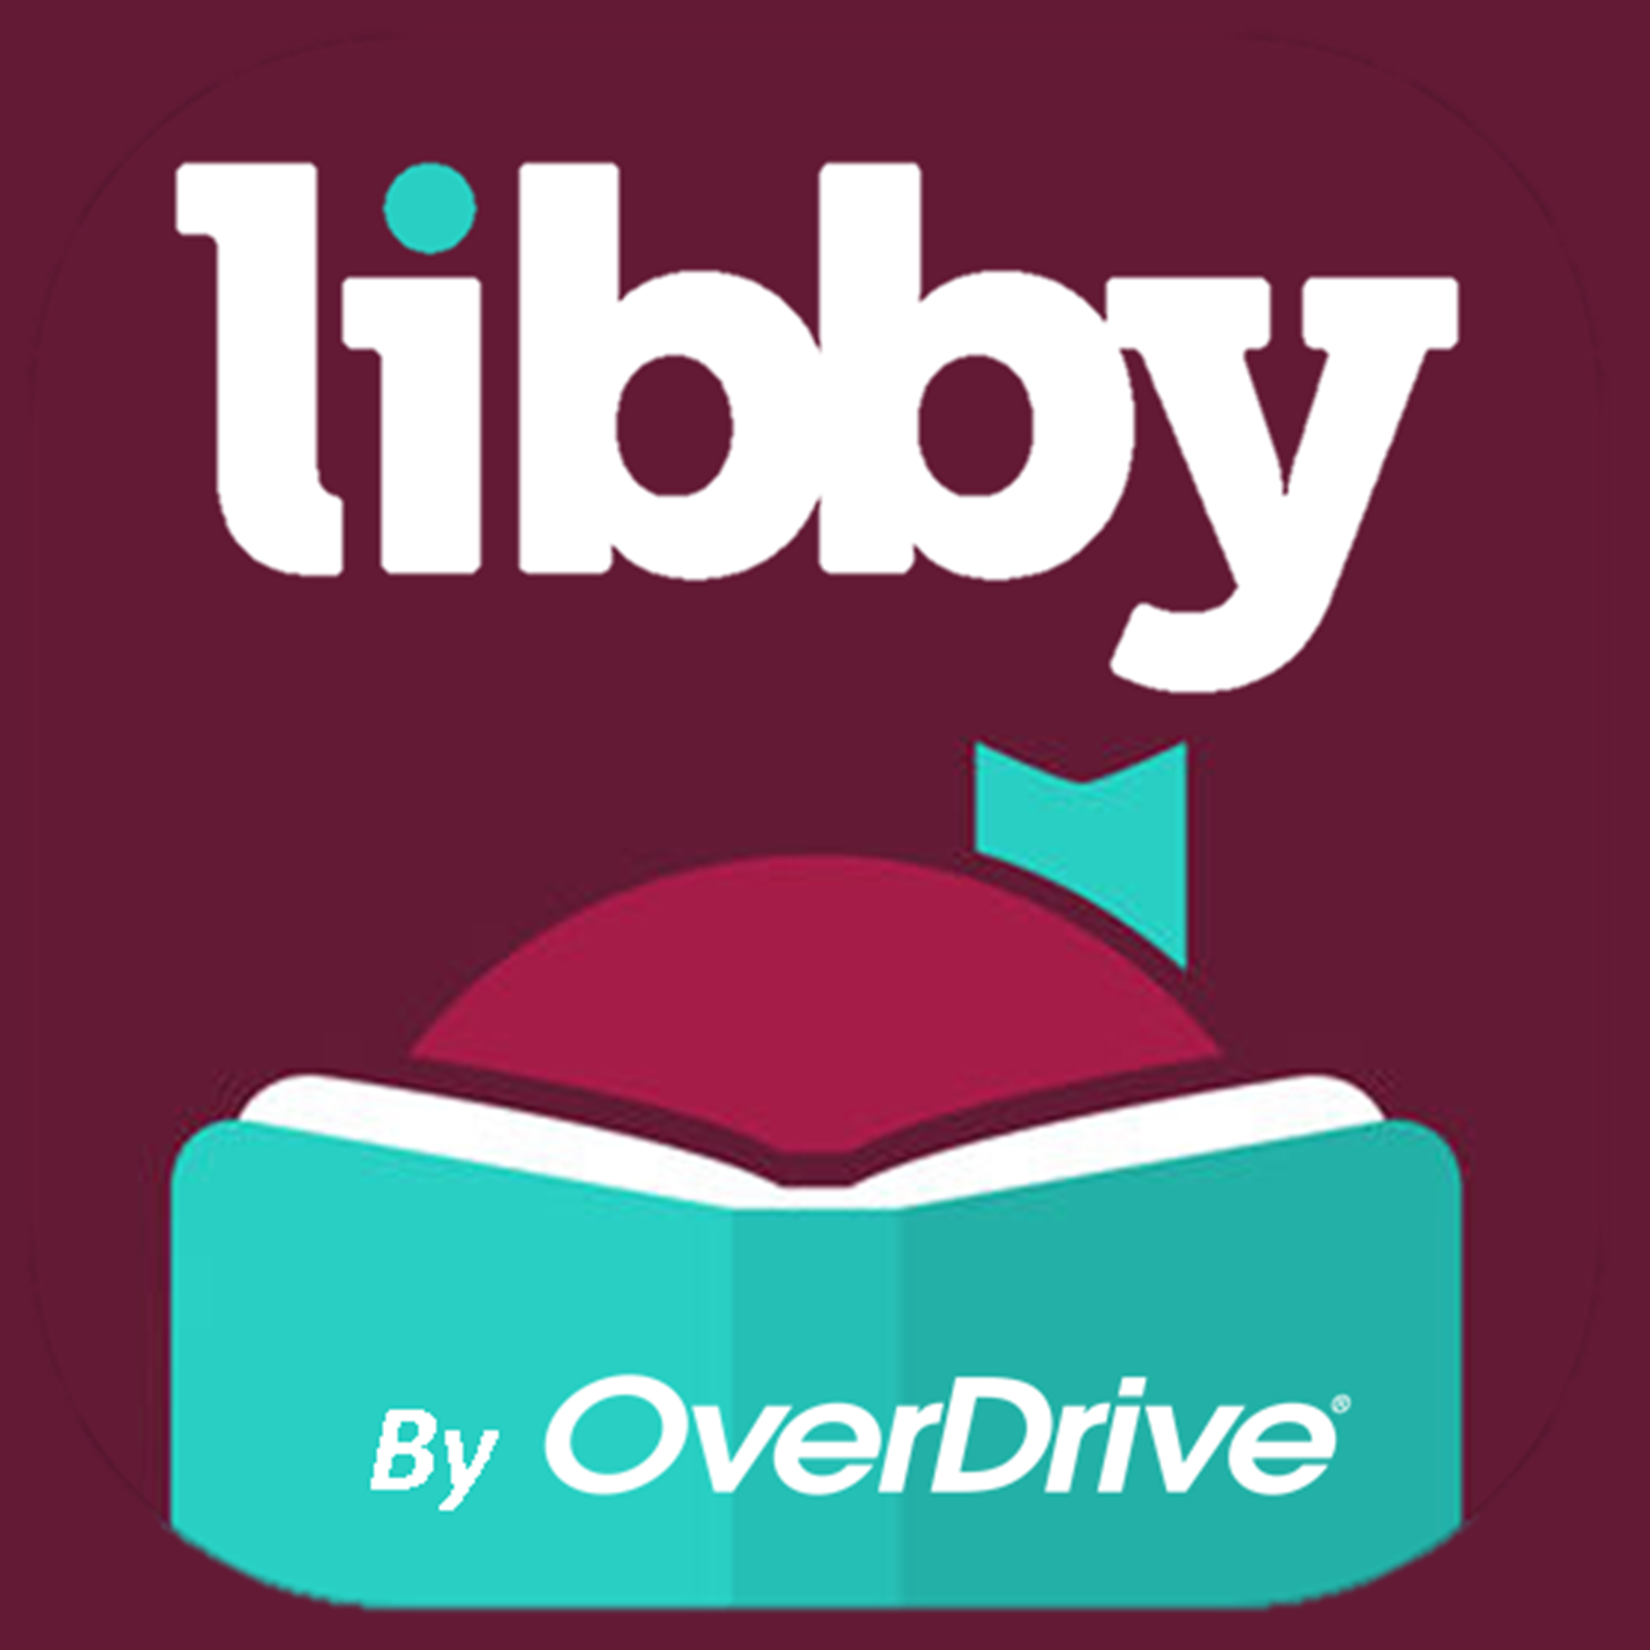 how do i download the libby app?